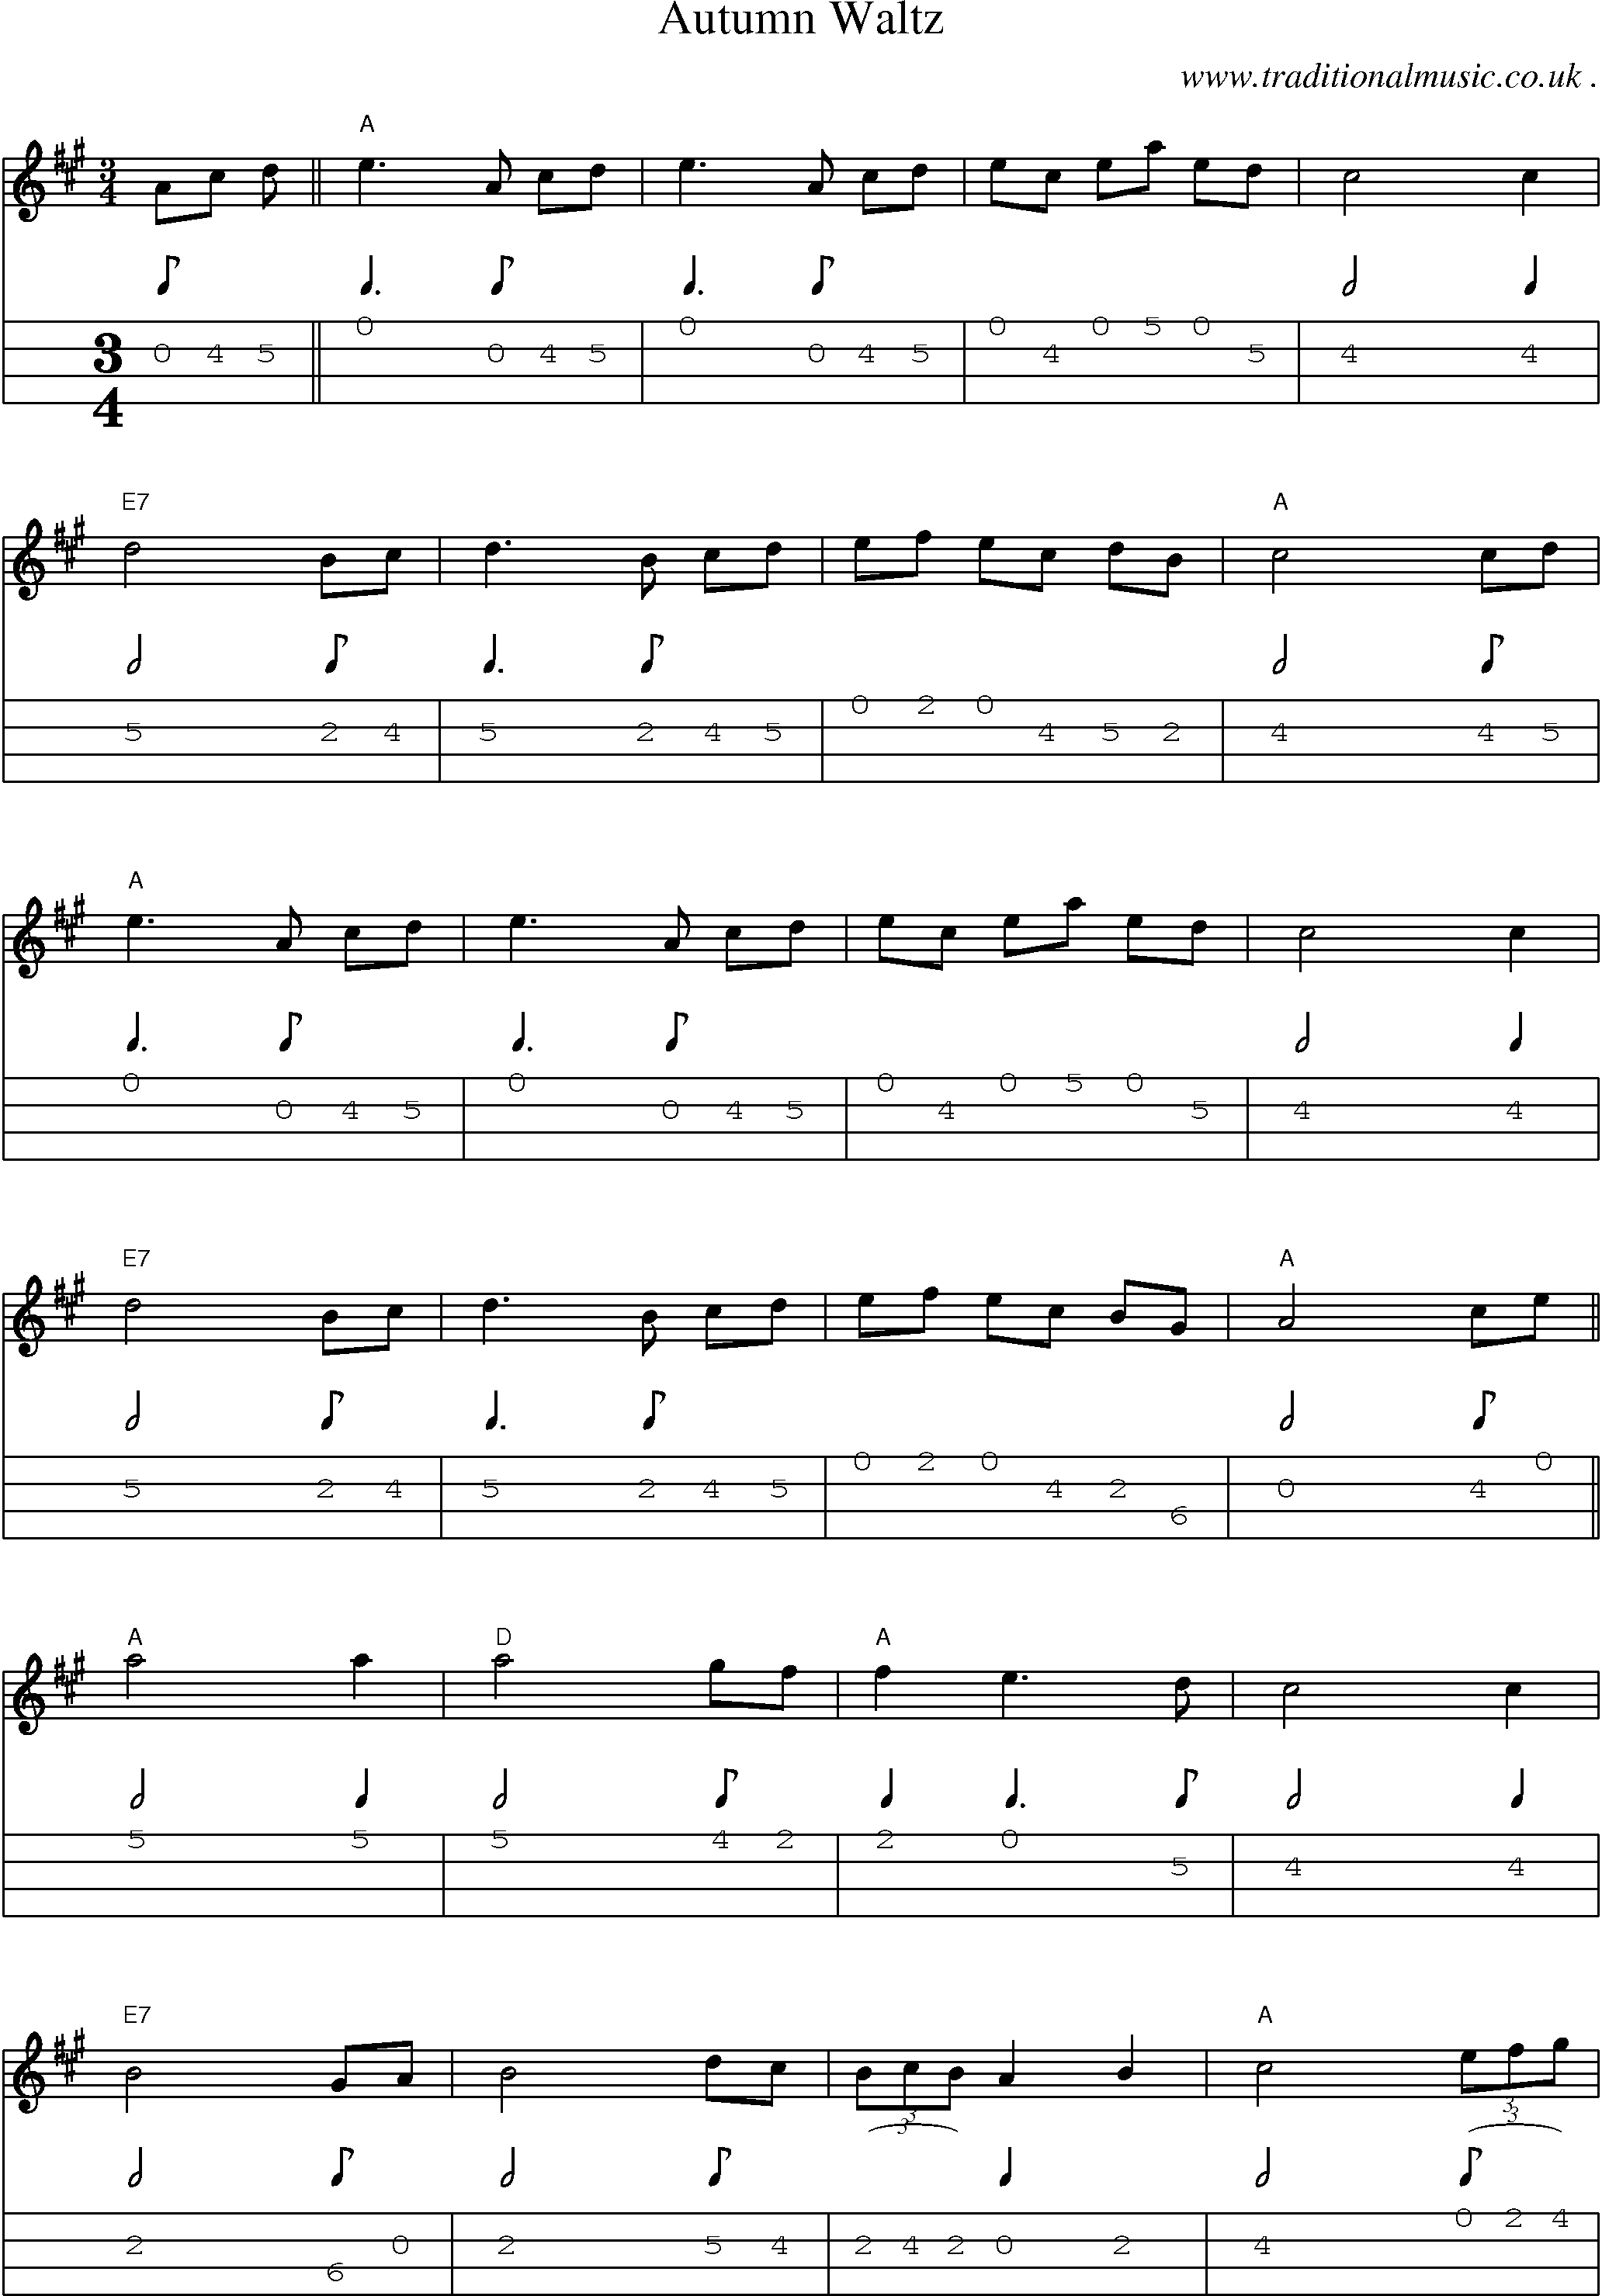 Music Score and Mandolin Tabs for Autumn Waltz